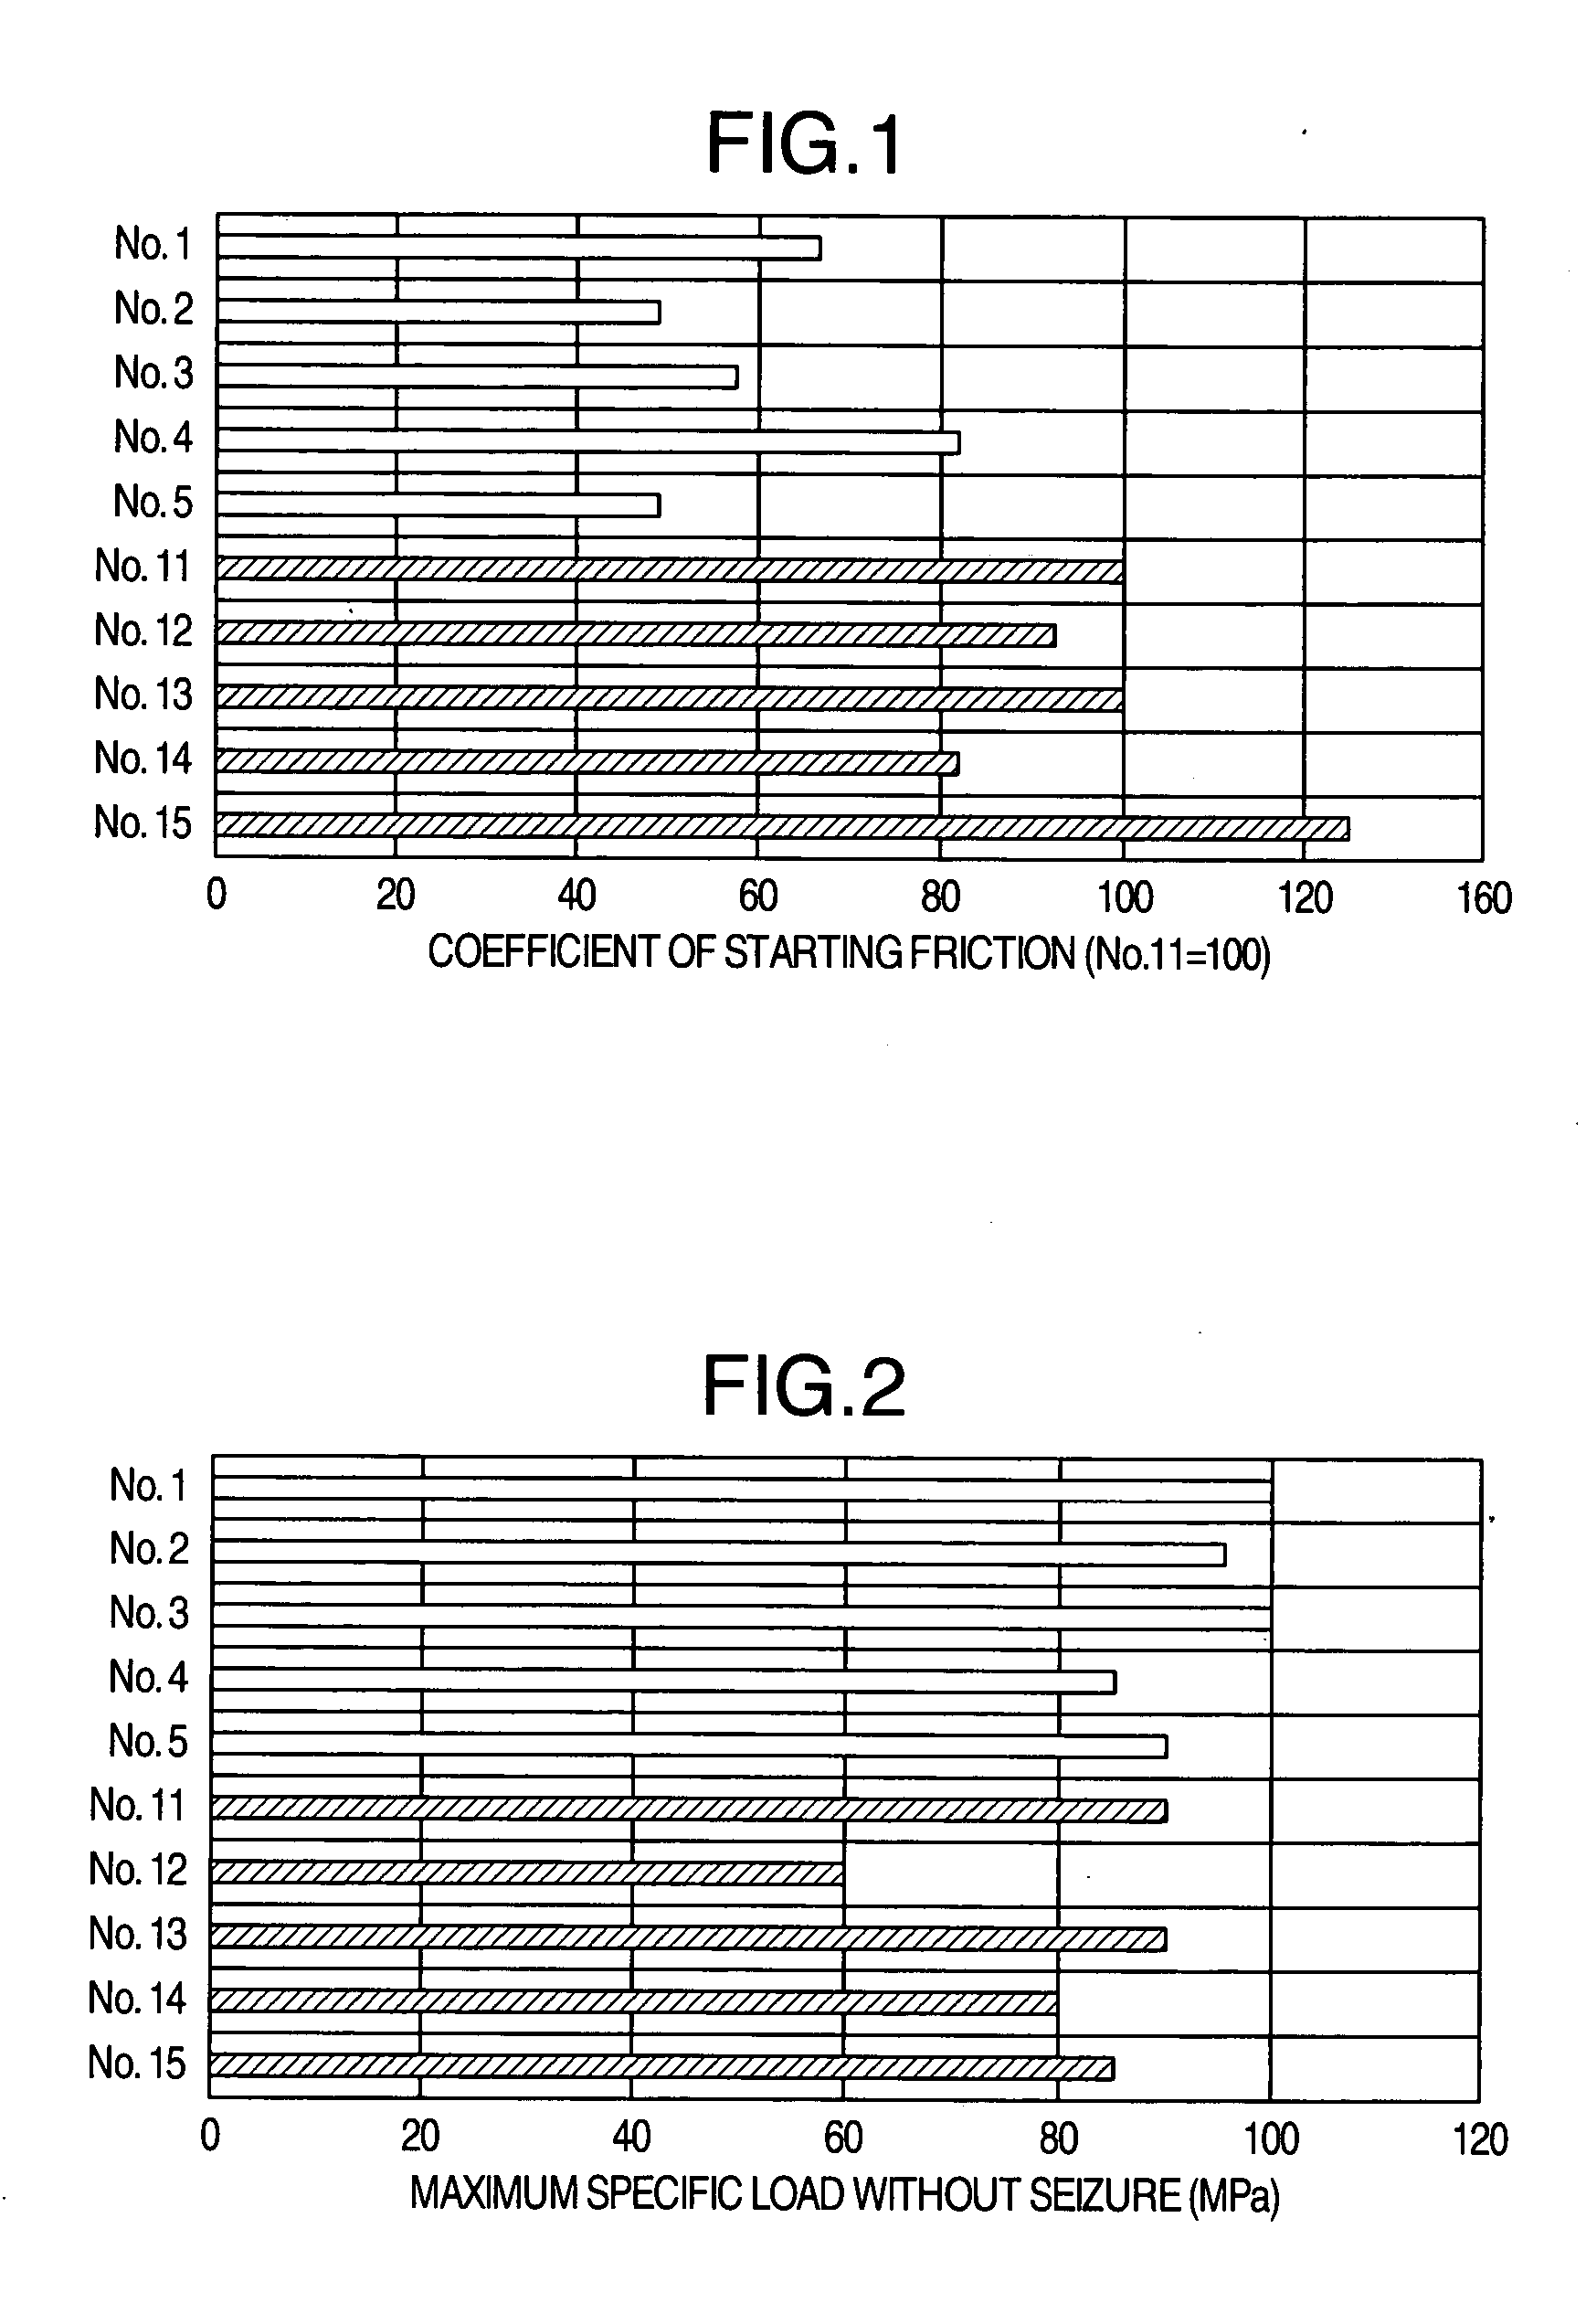 Plain bearing for internal combustion engines